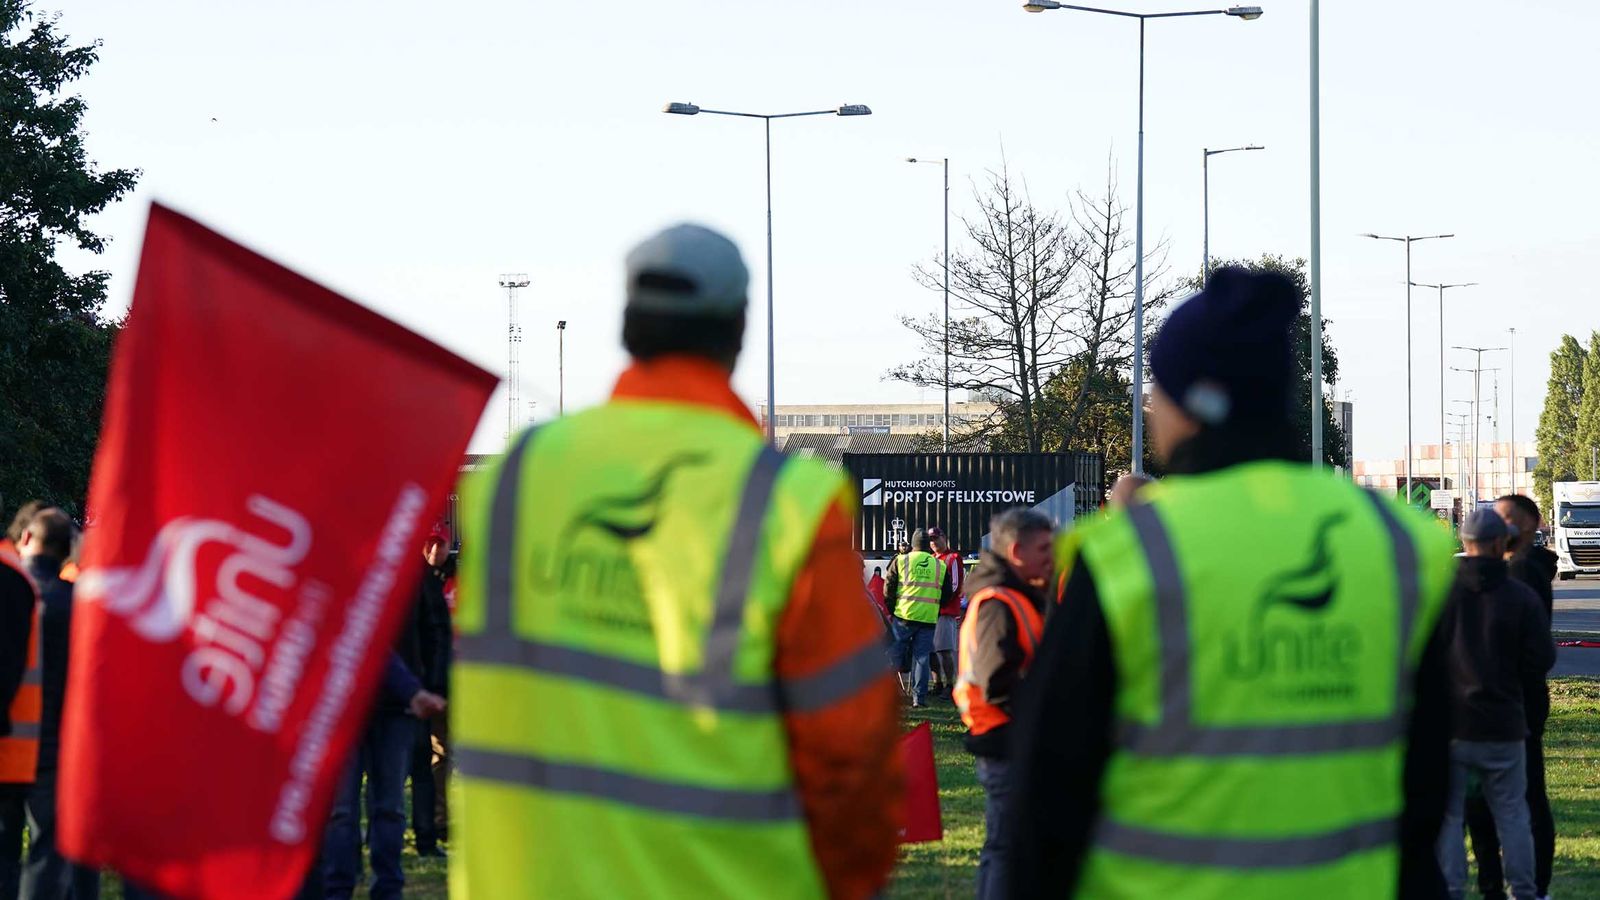 Unite union boss: Co-ordinated strikes could happen 'very soon'